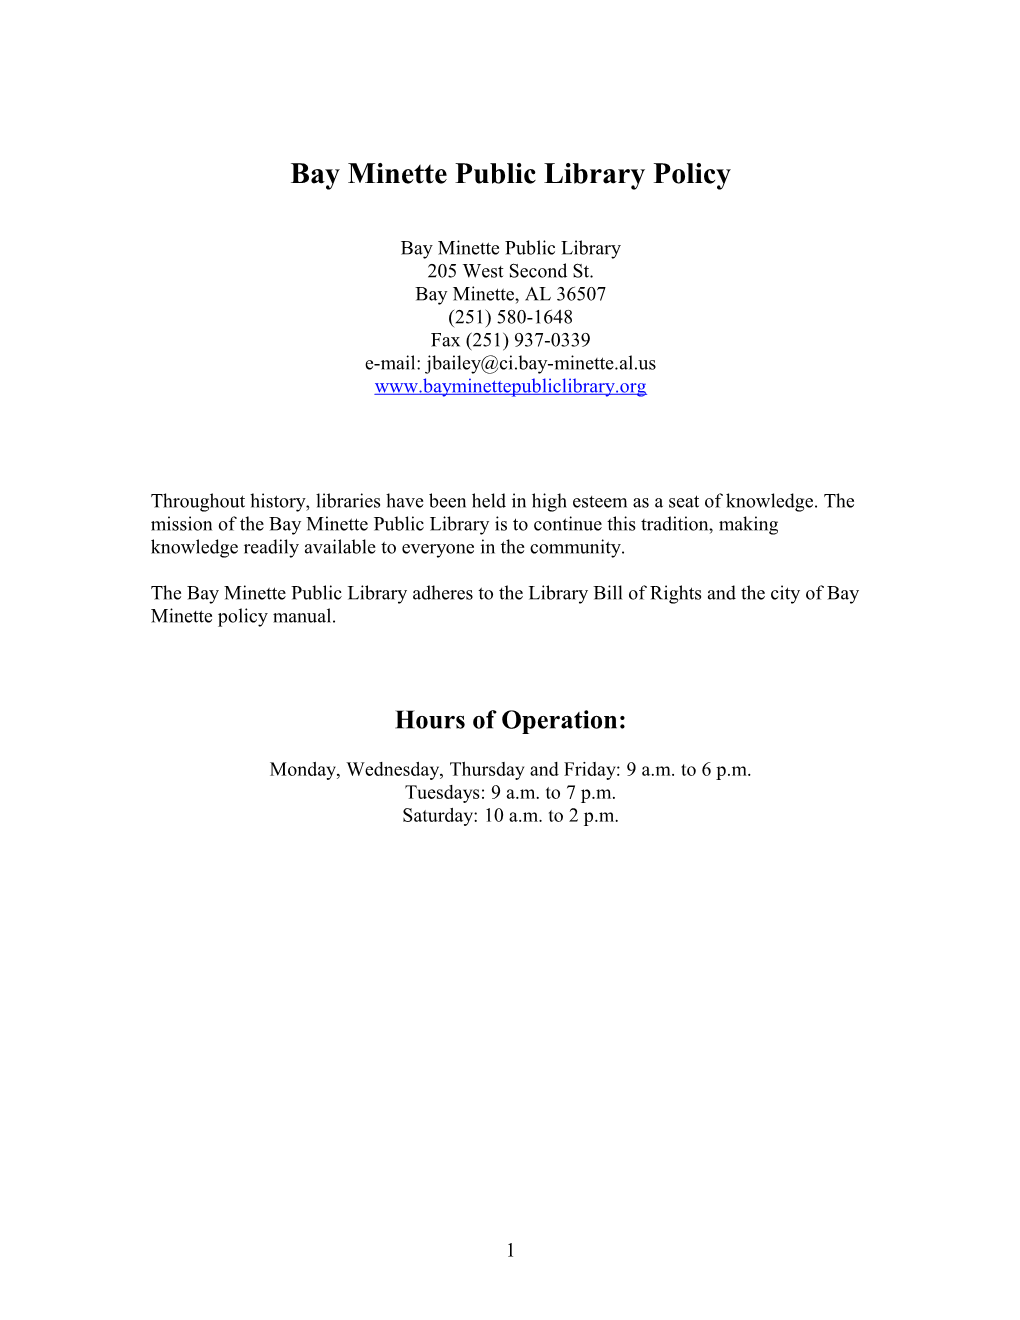 Bay Minette Public Library Policy